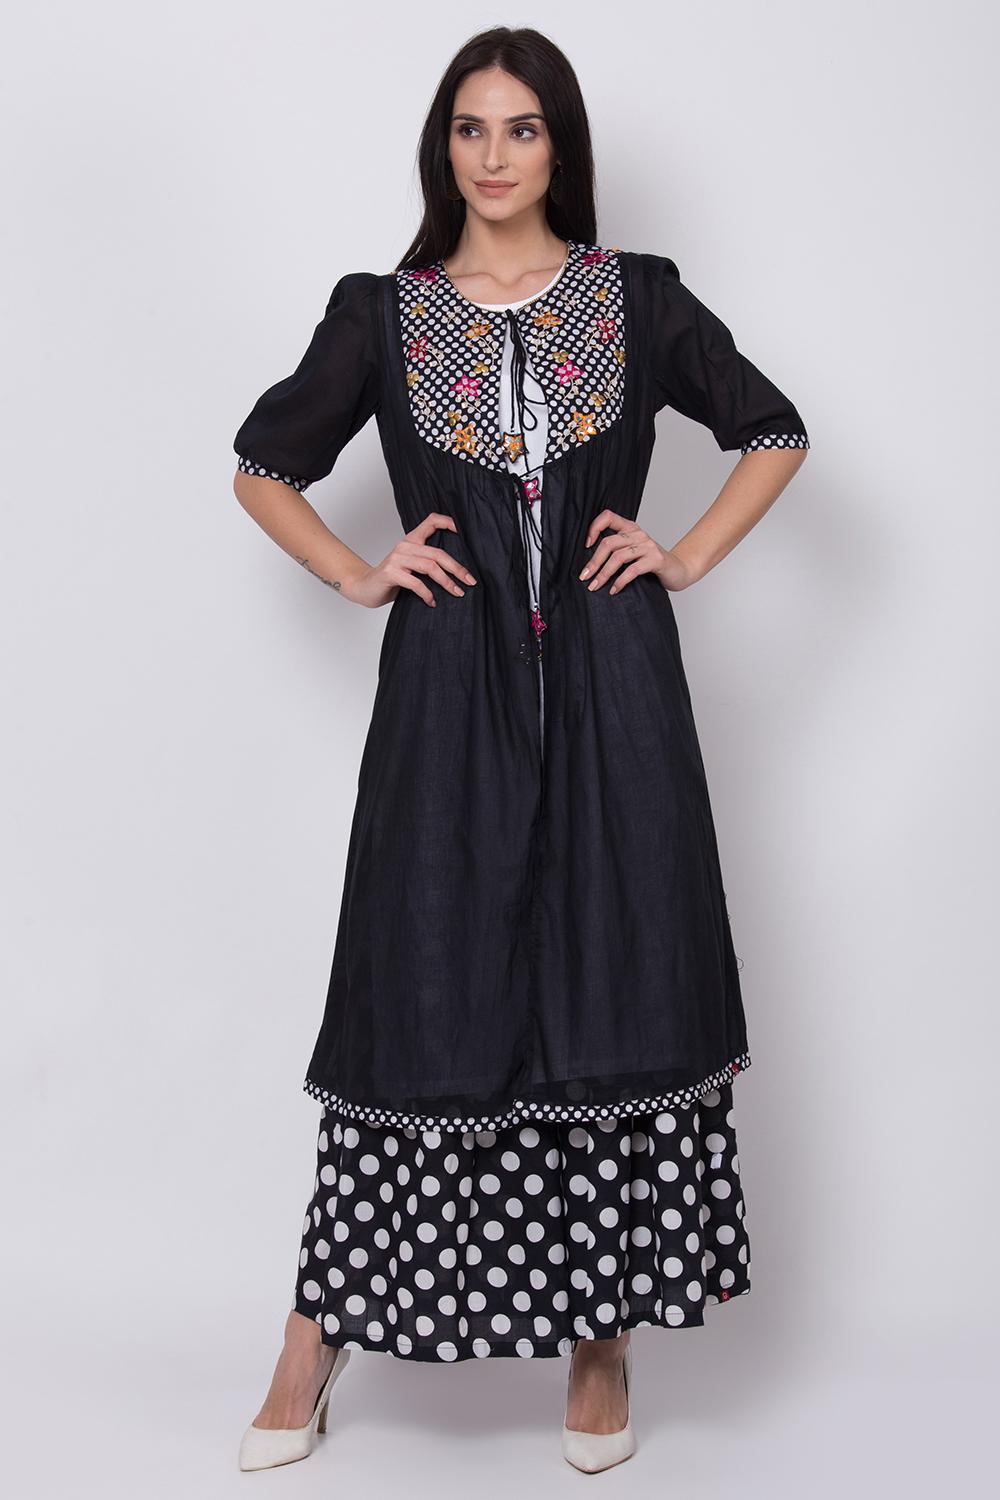 Buy Online Black And White Cotton Front Open Kurta for Women ...